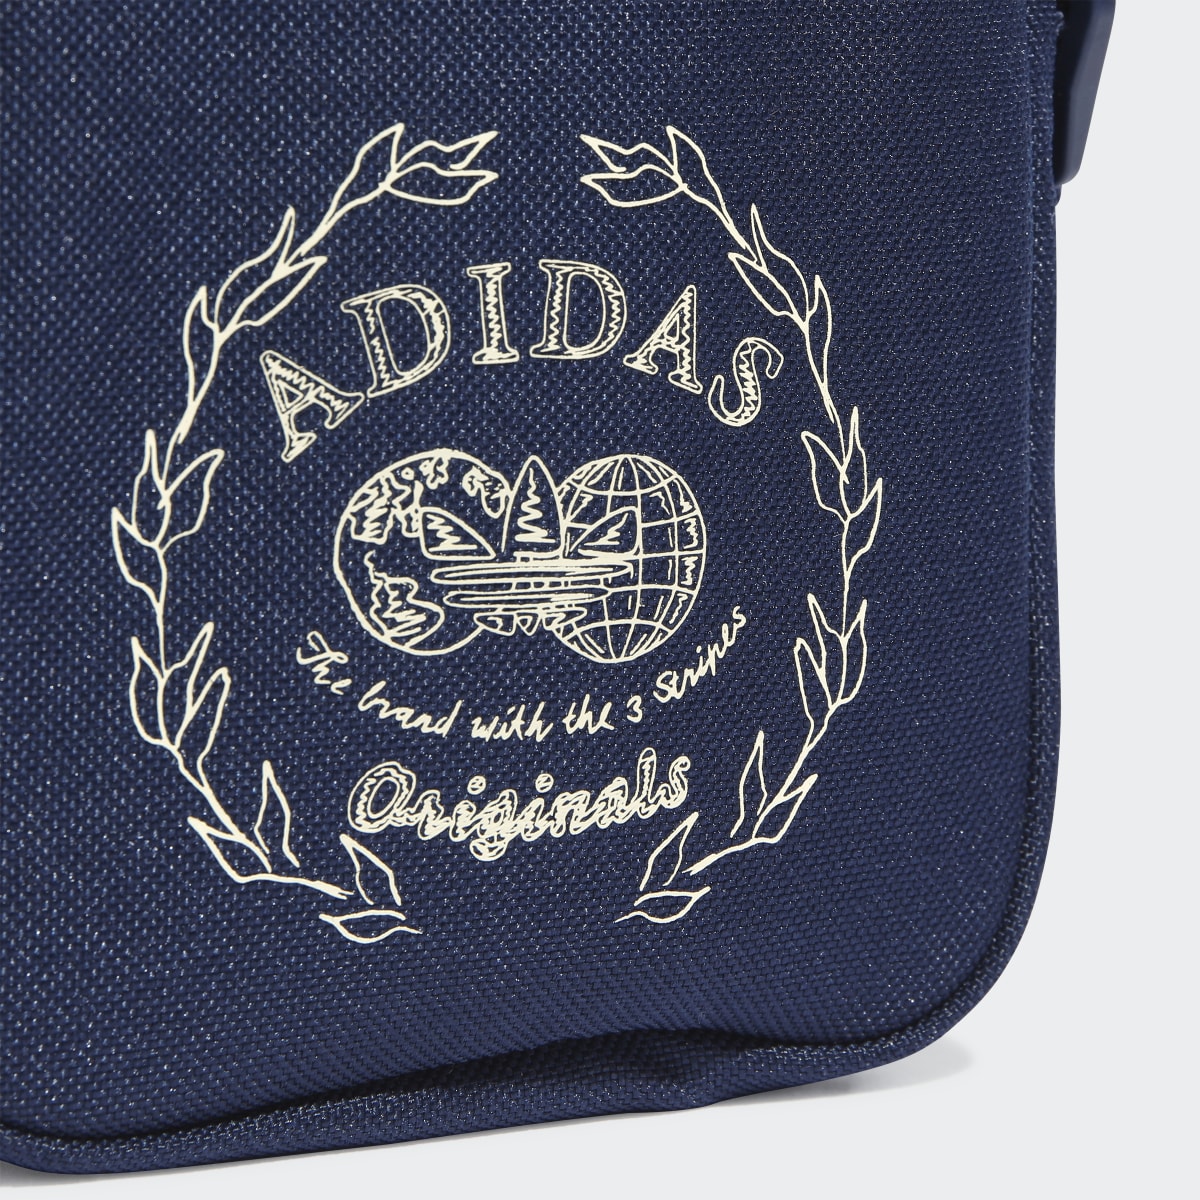 Adidas Hack the Archive Festival Bag. 6